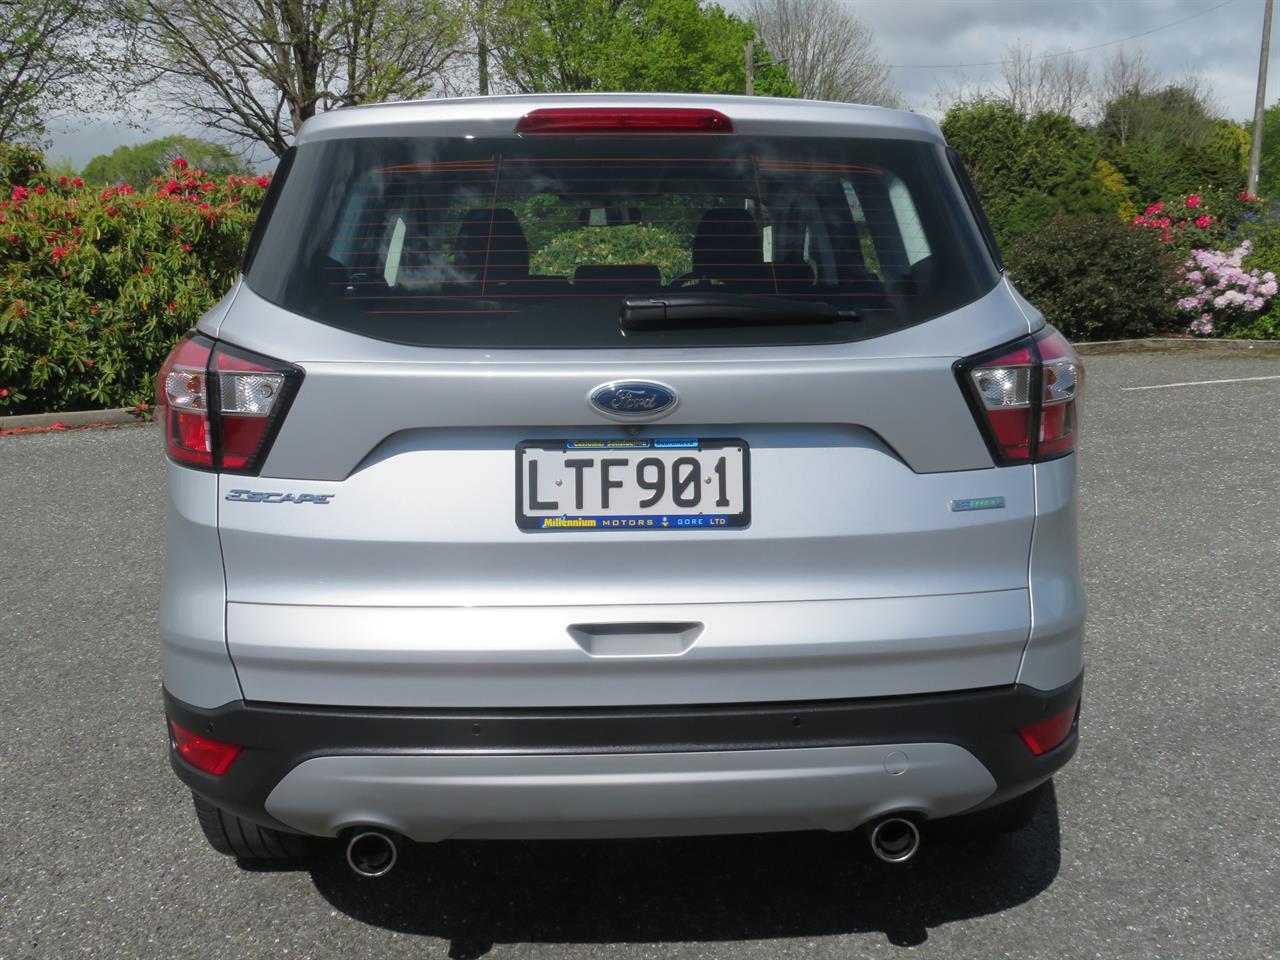 image-7, 2018 Ford Escape AMBIENTE - 4WD - LOW KM'S - NZ NE at Gore